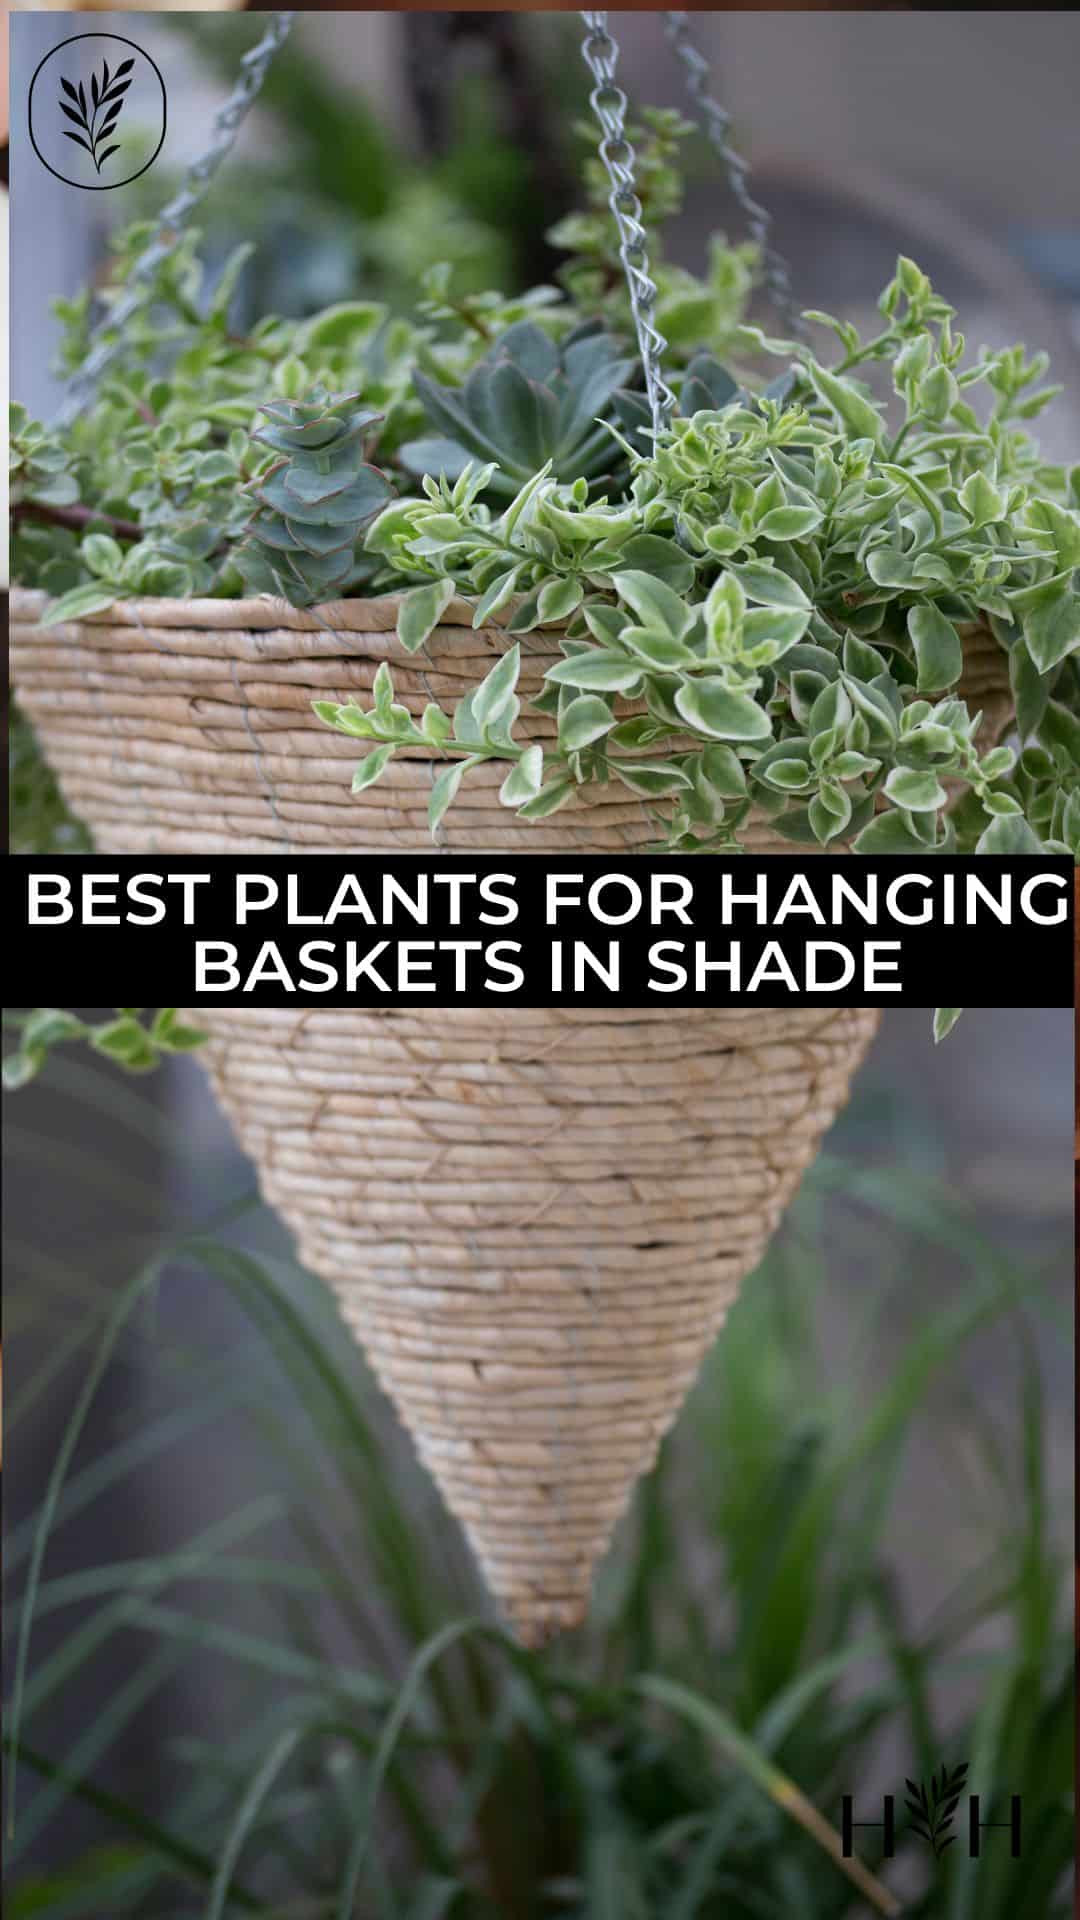 Best plants for hanging baskets in shade via @home4theharvest